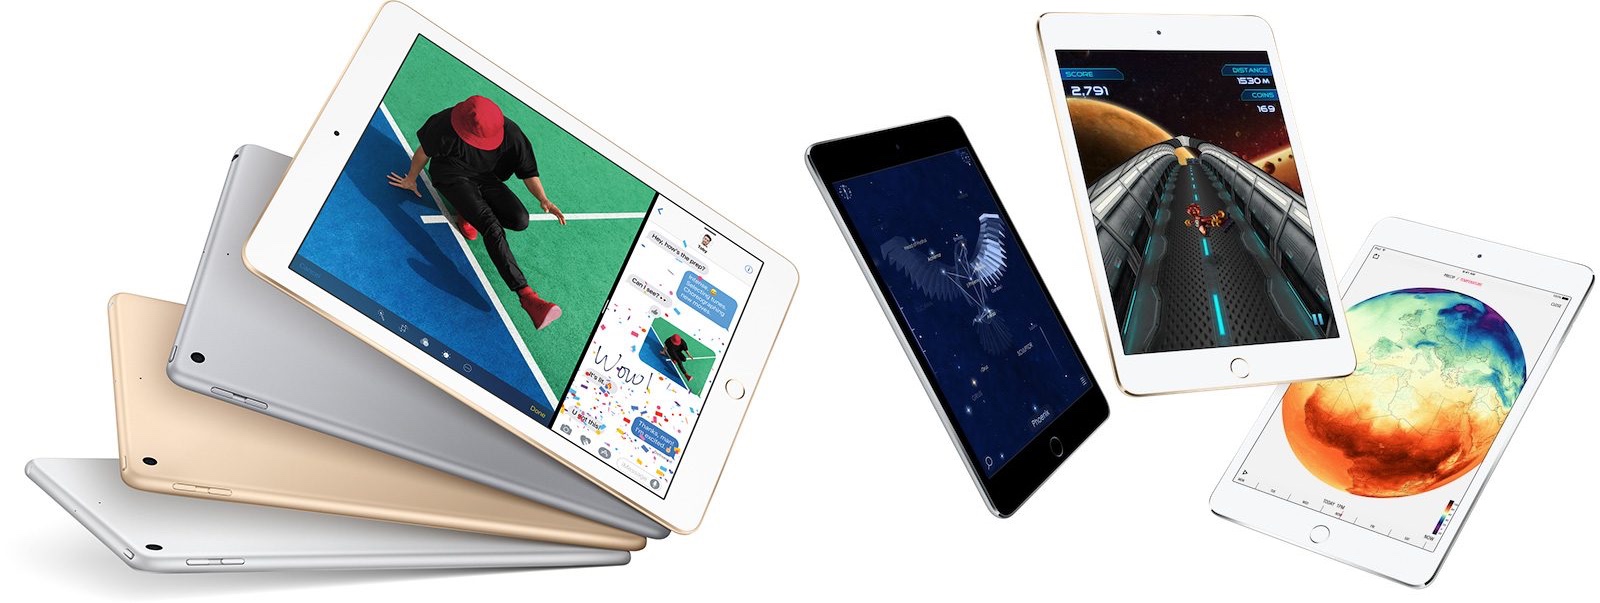 Apple Will Reportedly Launch iPad mini 5 and Entry-Level 10-inch iPad Next Year